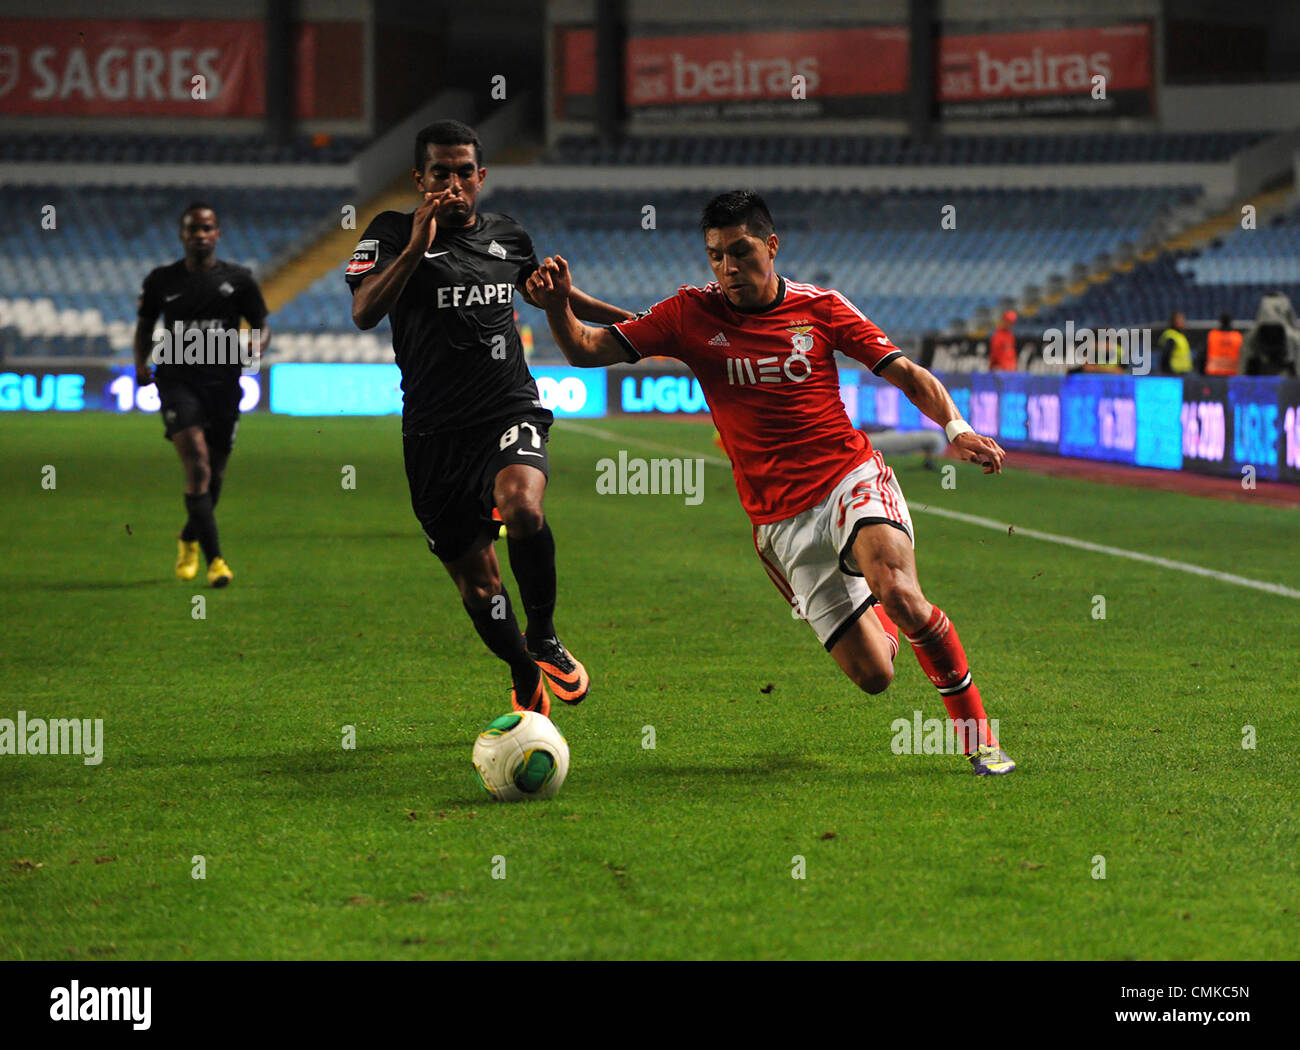 Benfica argentinian midfielder Enzo Perez vies for the ball with Academica defender Marcelo during the portuguese Liga Sagres football match between Academica and Benfica Stock Photo